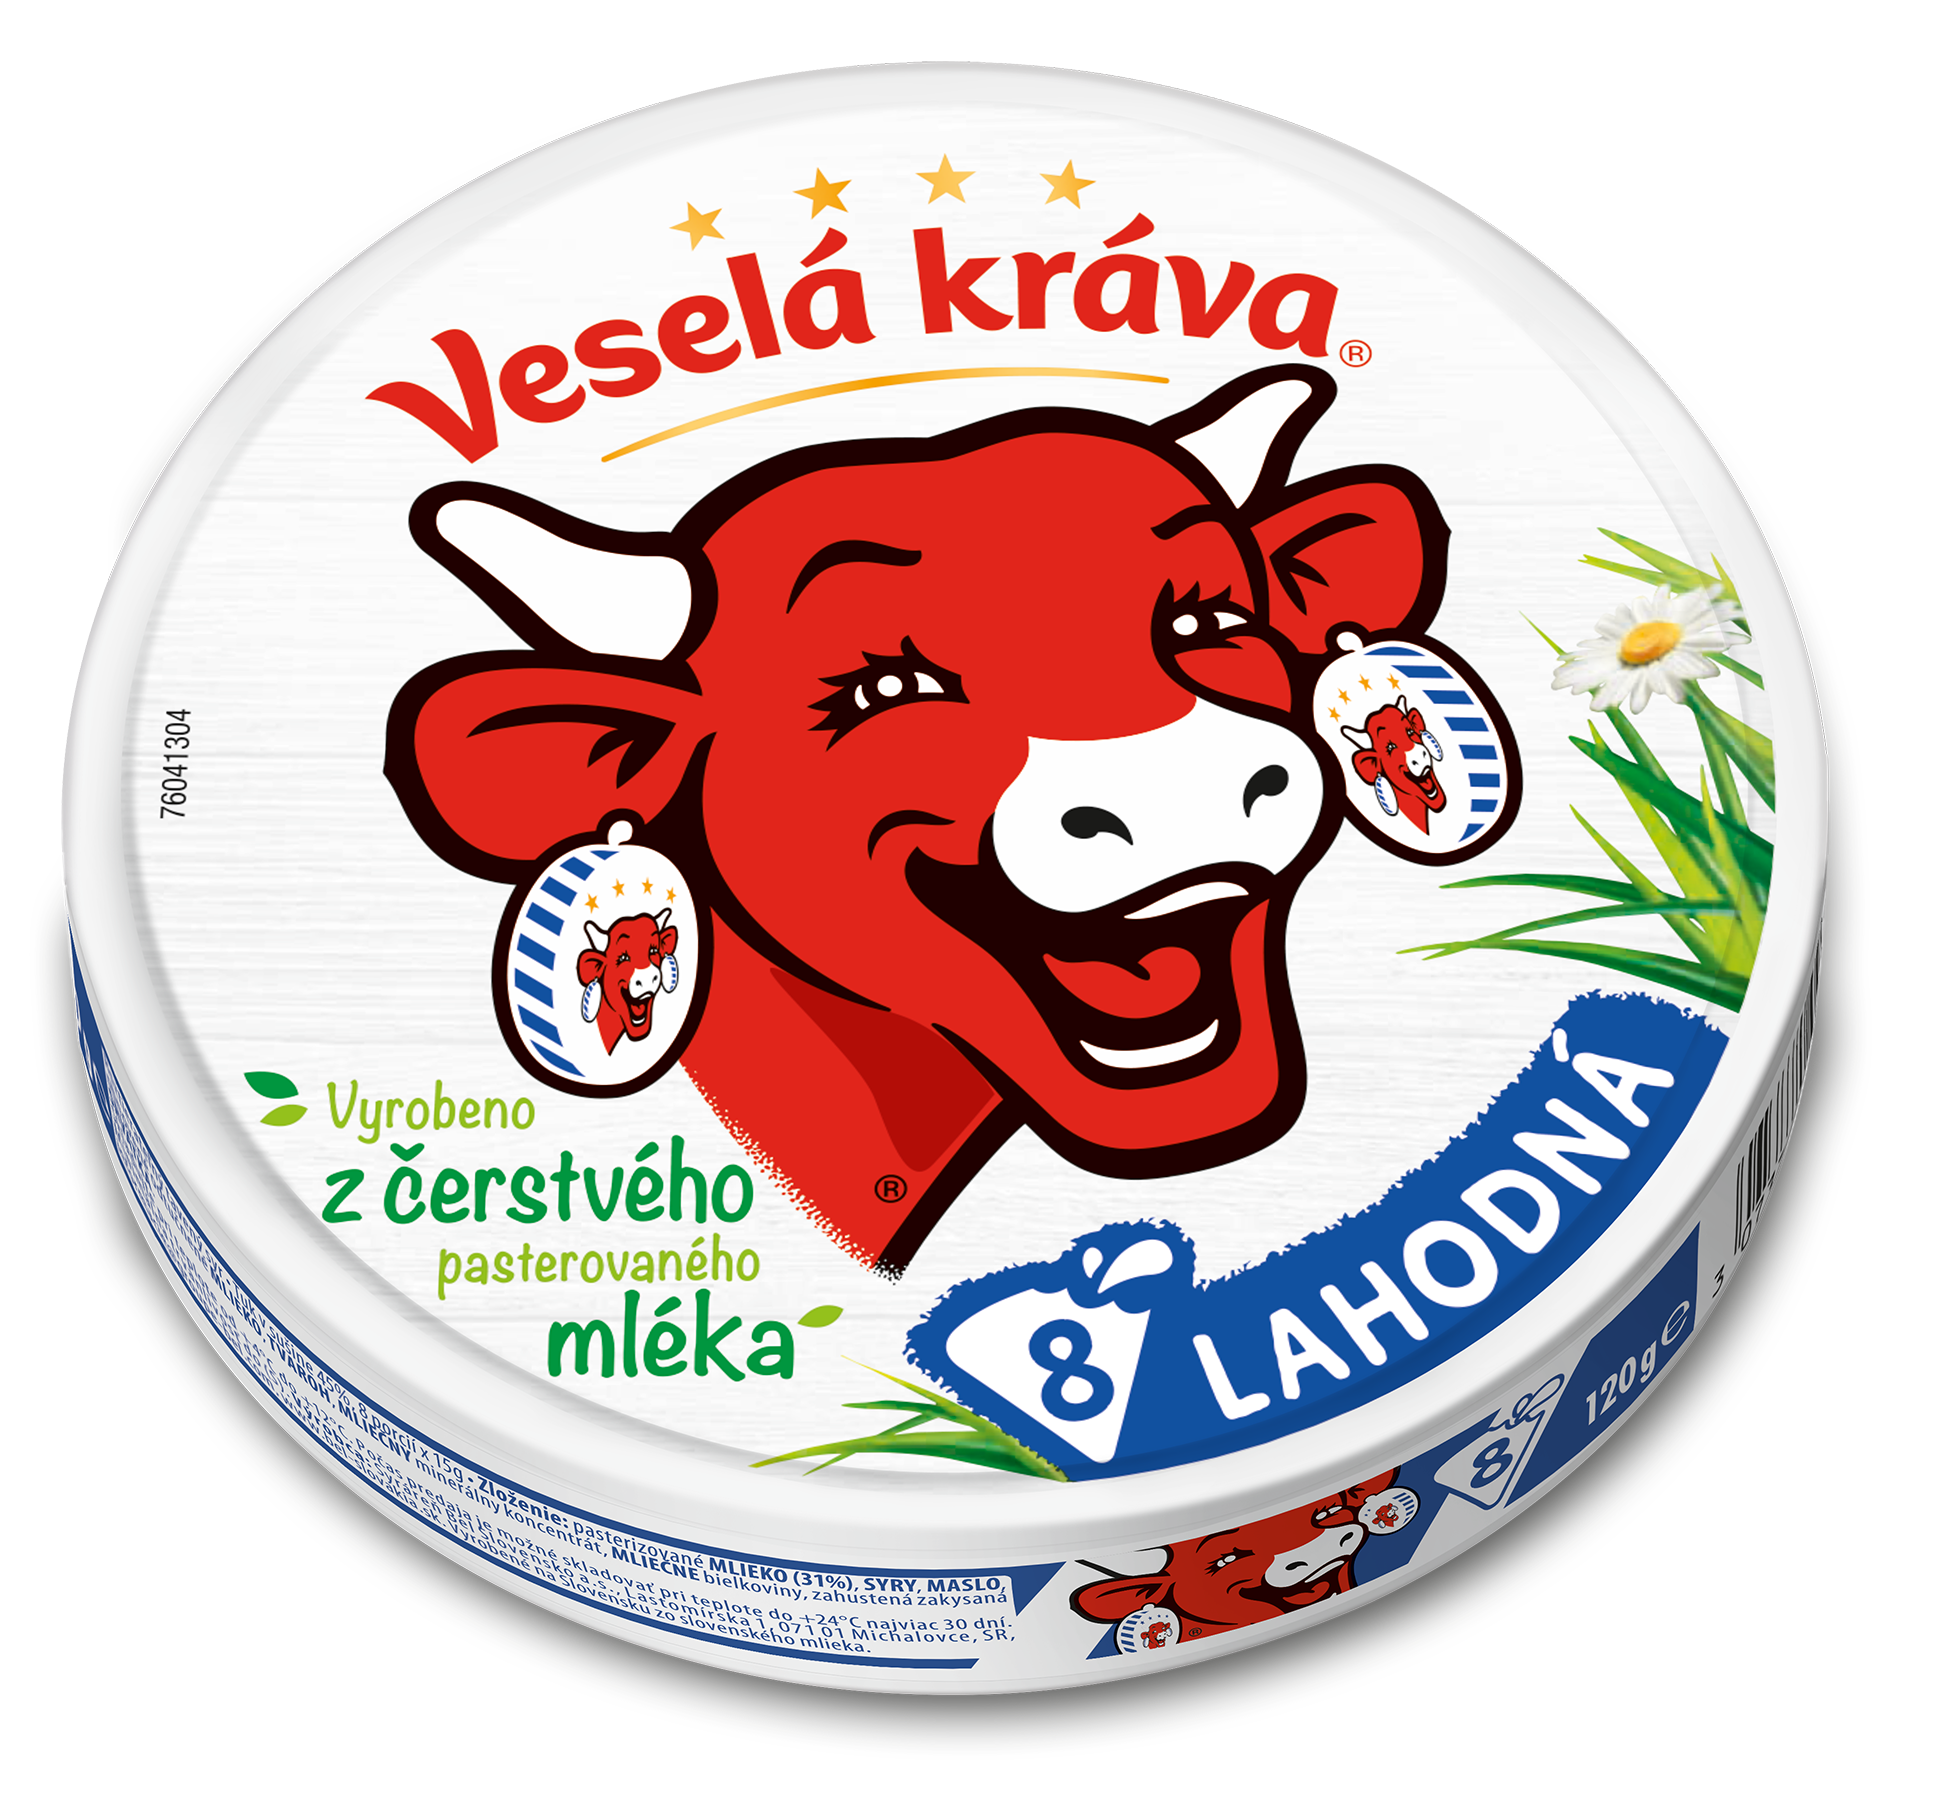 The Laughing cow